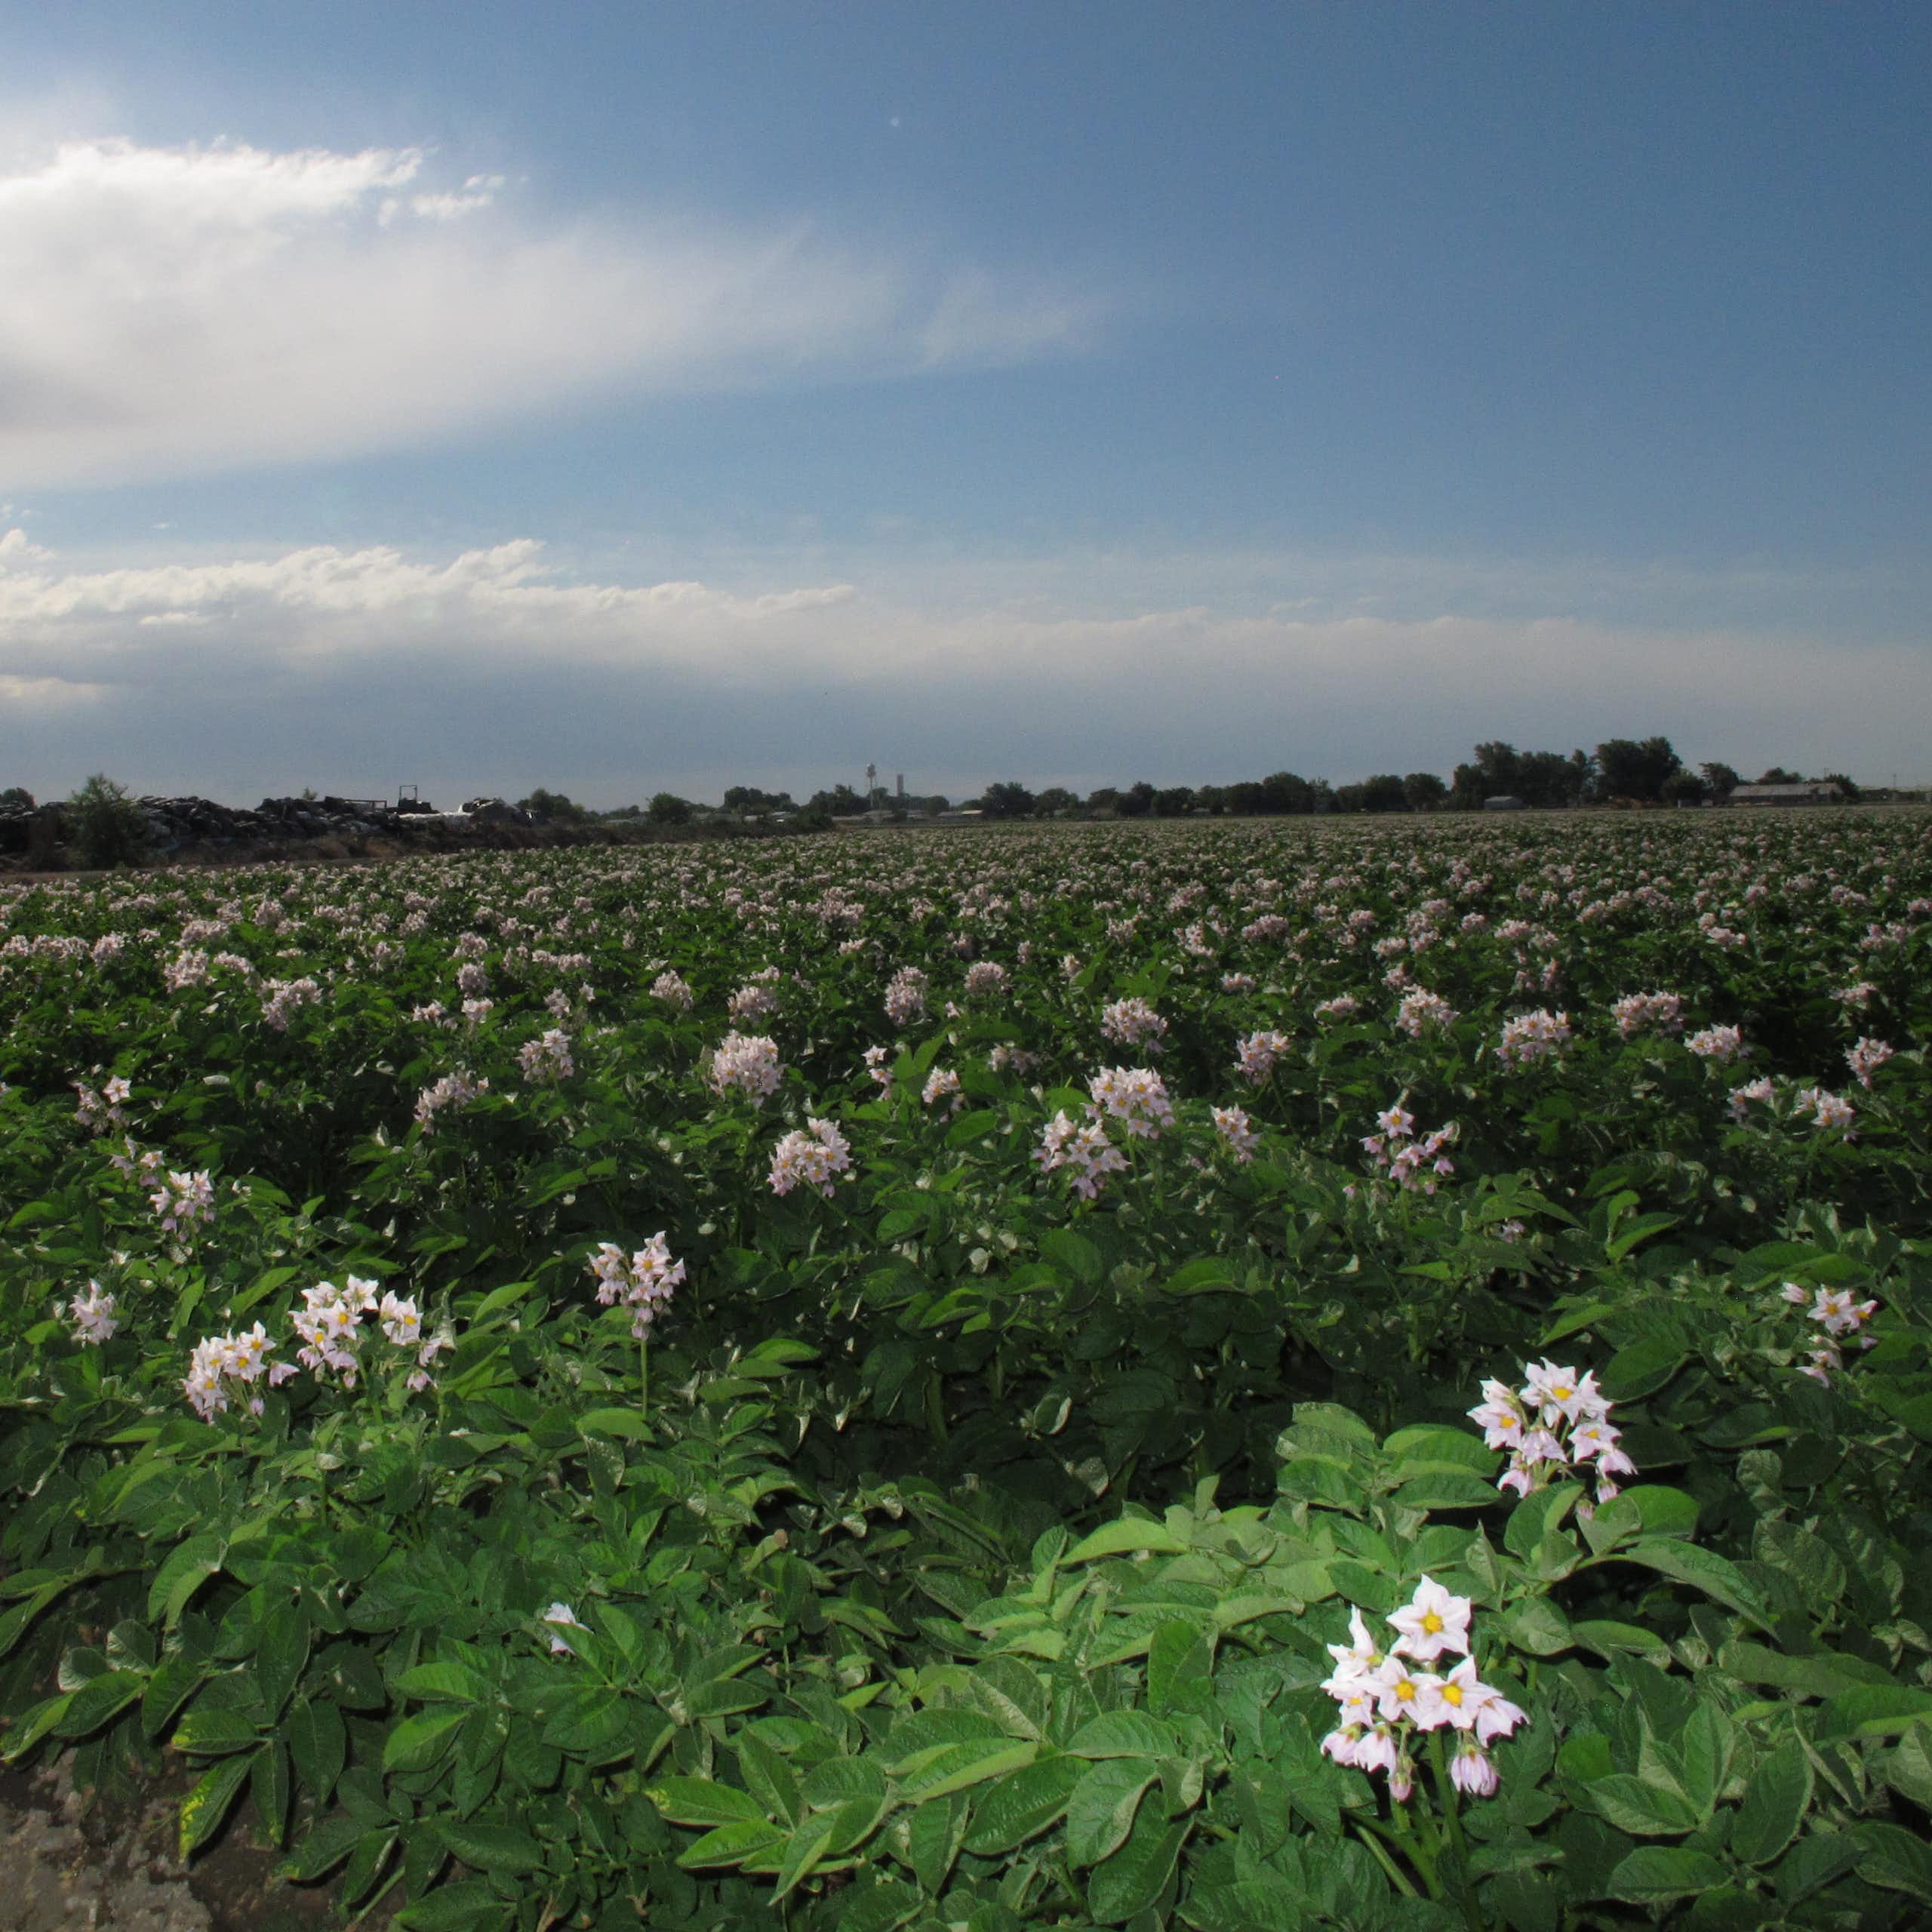 A field of flowering potato plants under a partly cloudy sky, with a building in the background. 